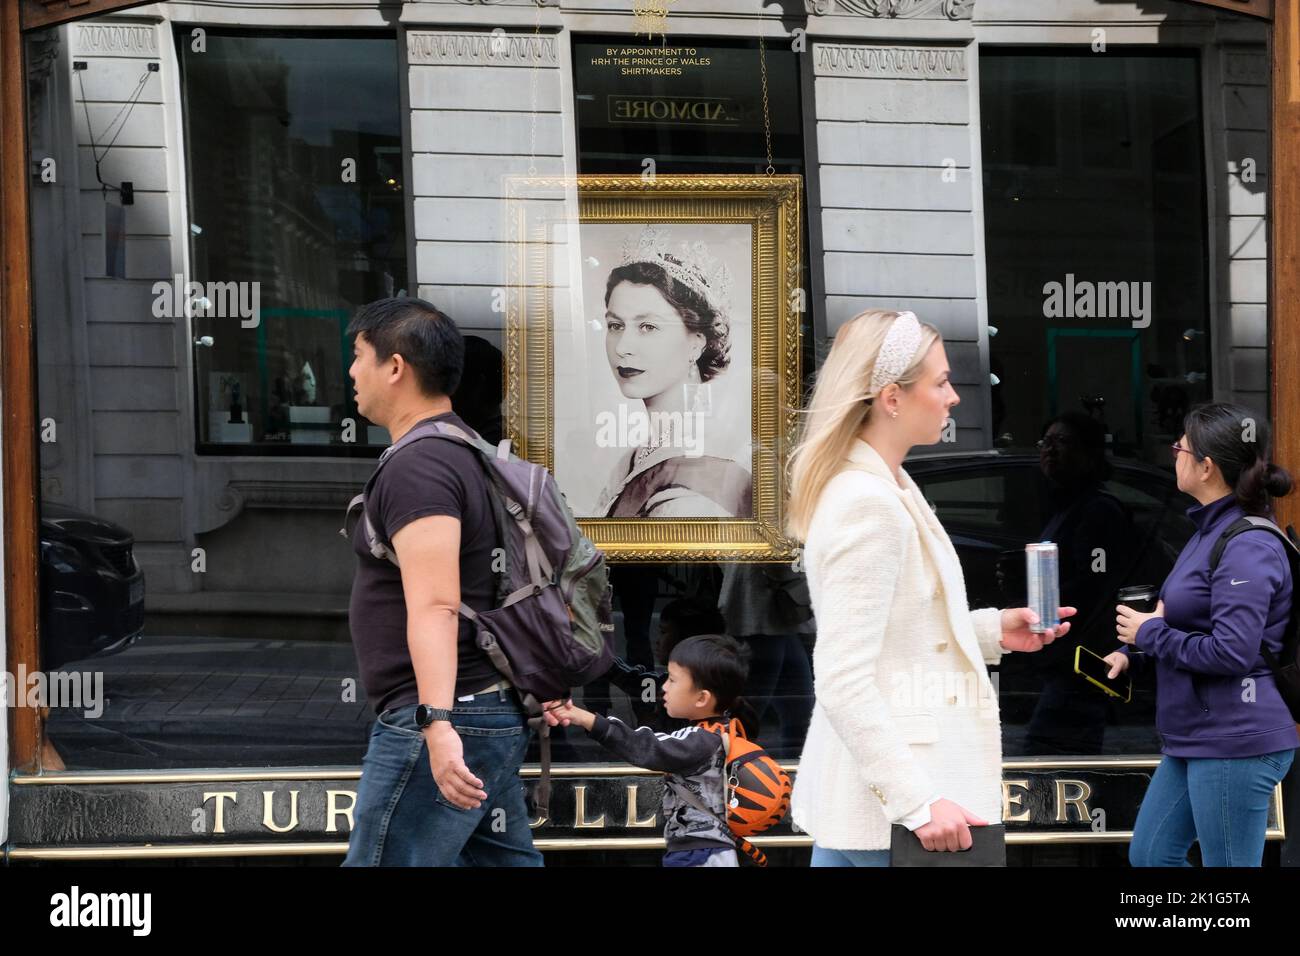 Jermyn Street, London, UK. 18th Sept 2022. Mourning the death of Queen Elizabeth II aged 96. Shop windows near Piccadilly display pictures and dedications to Queen Elizabeth. Turnbull & Asser, Jermyn Street. Credit: Matthew Chattle/Alamy Live News Stock Photo